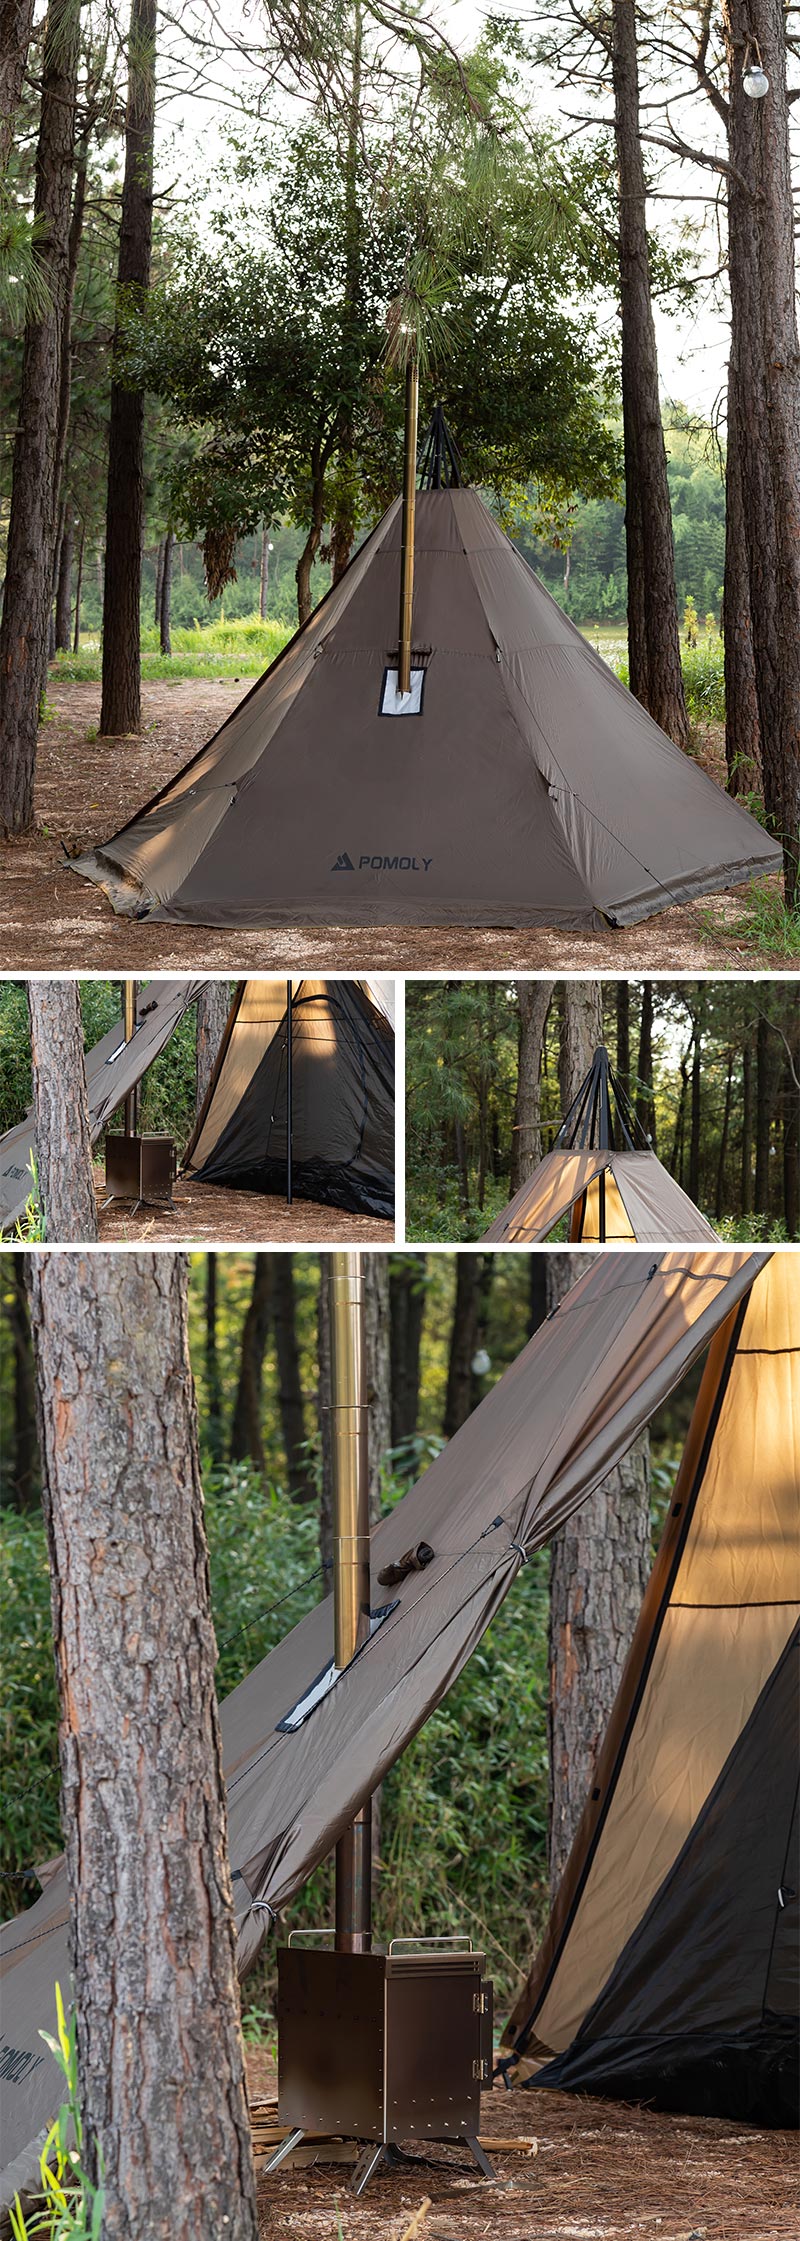 Hussar Plus teepee tent with wood stove in the forests